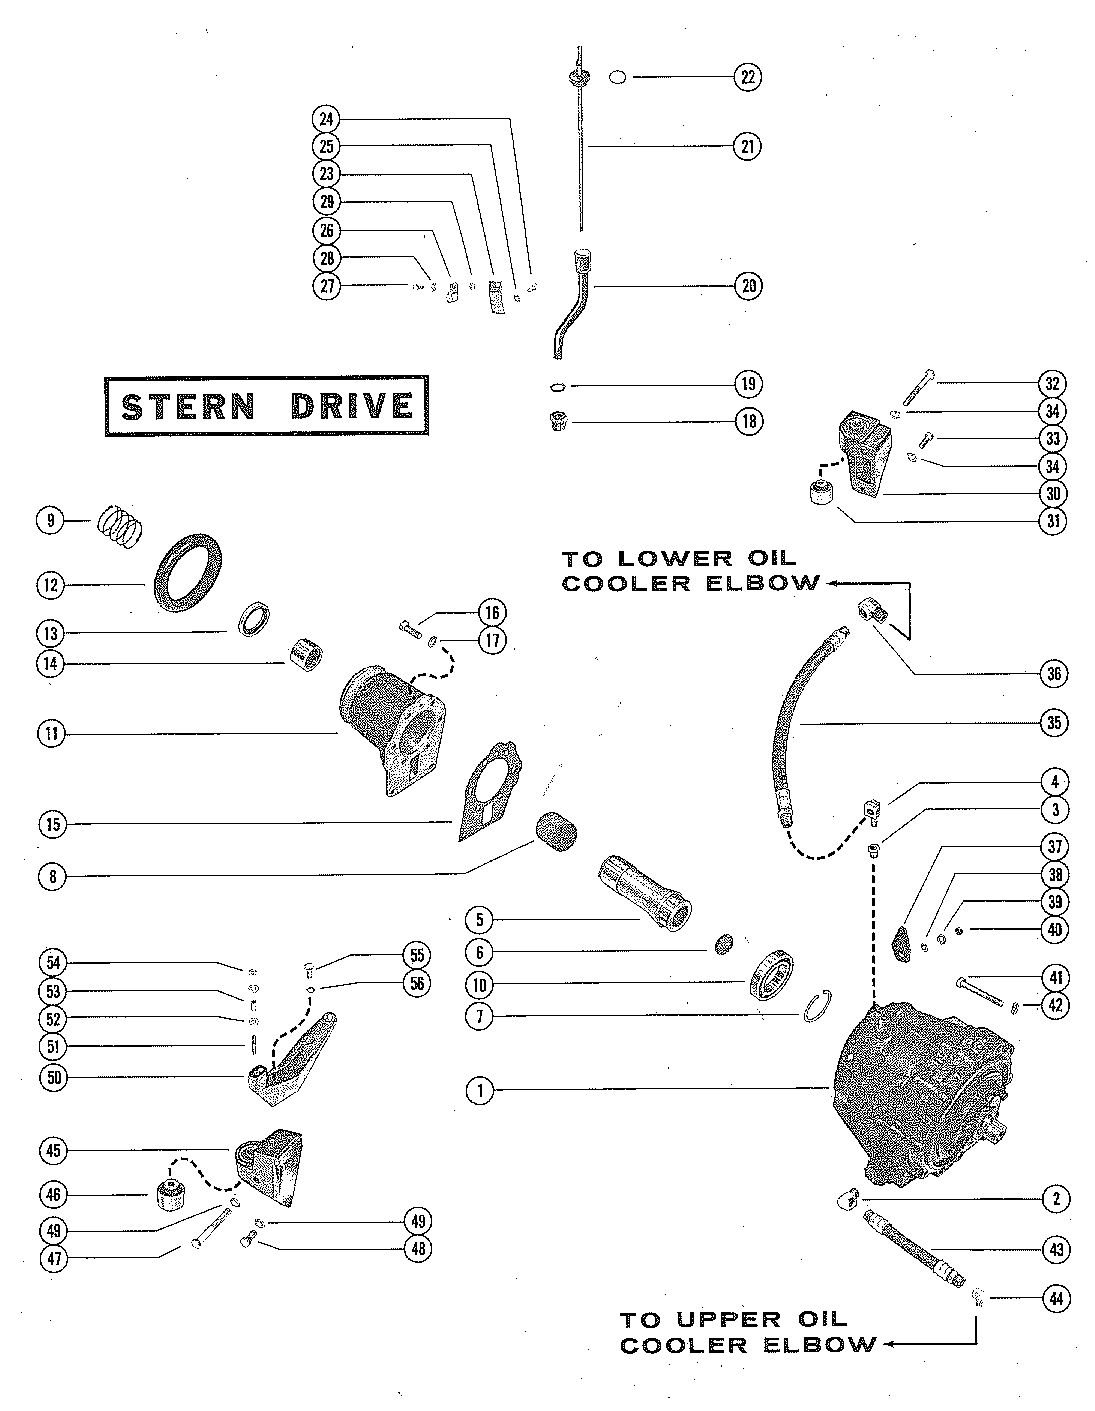 MERCRUISER 250 ENGINE (STERNDRIVE AND INBOARD) TRANSMISSION ASSEMBLY (STERN DRIVE)